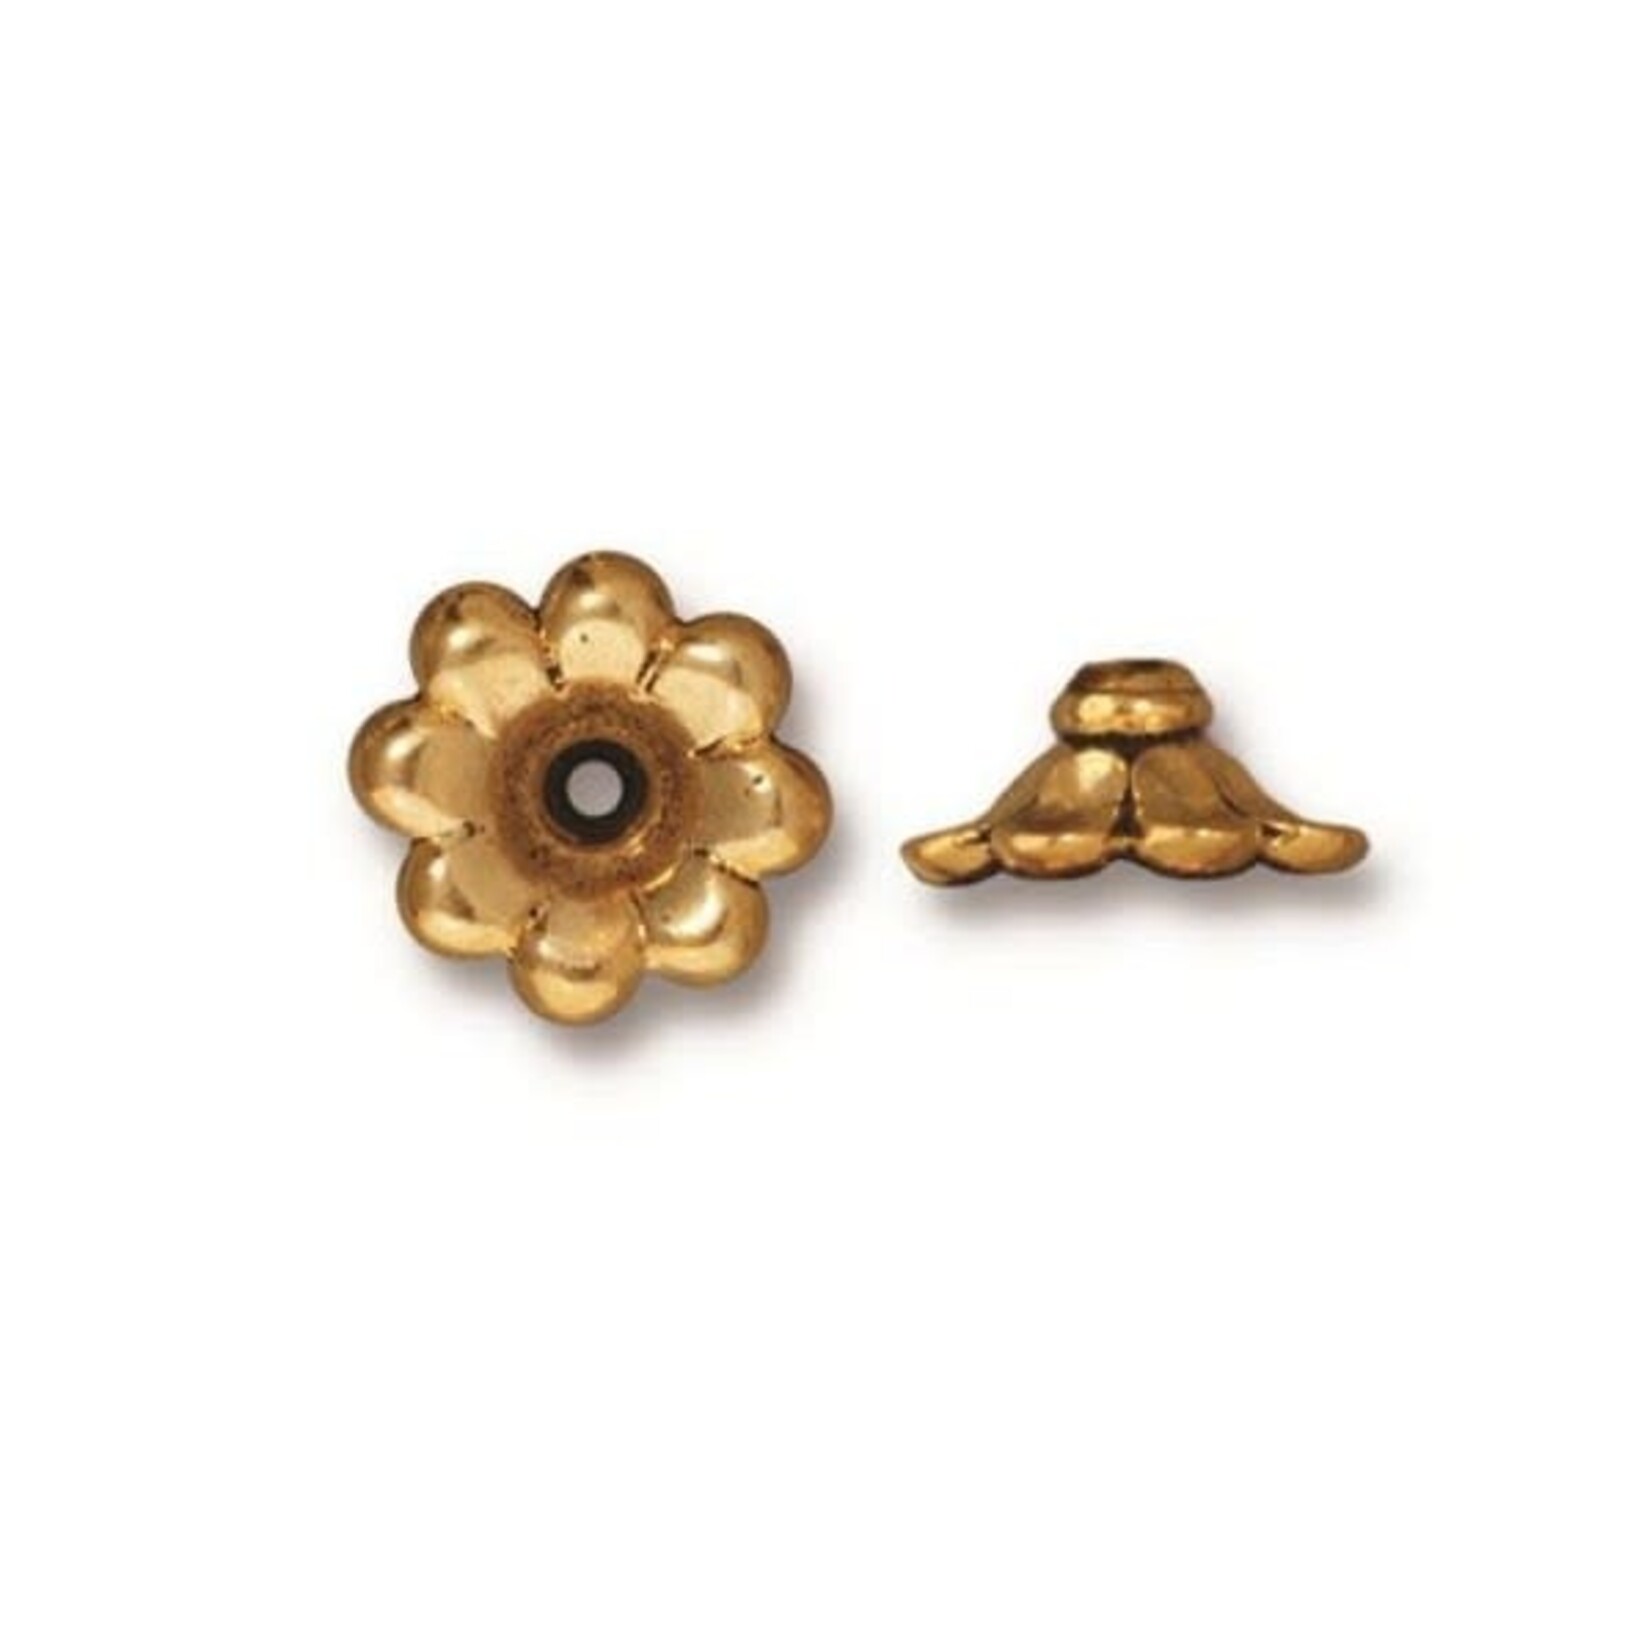 TierraCast Antique Gold Plated 11mm Scalloped Bead Cap